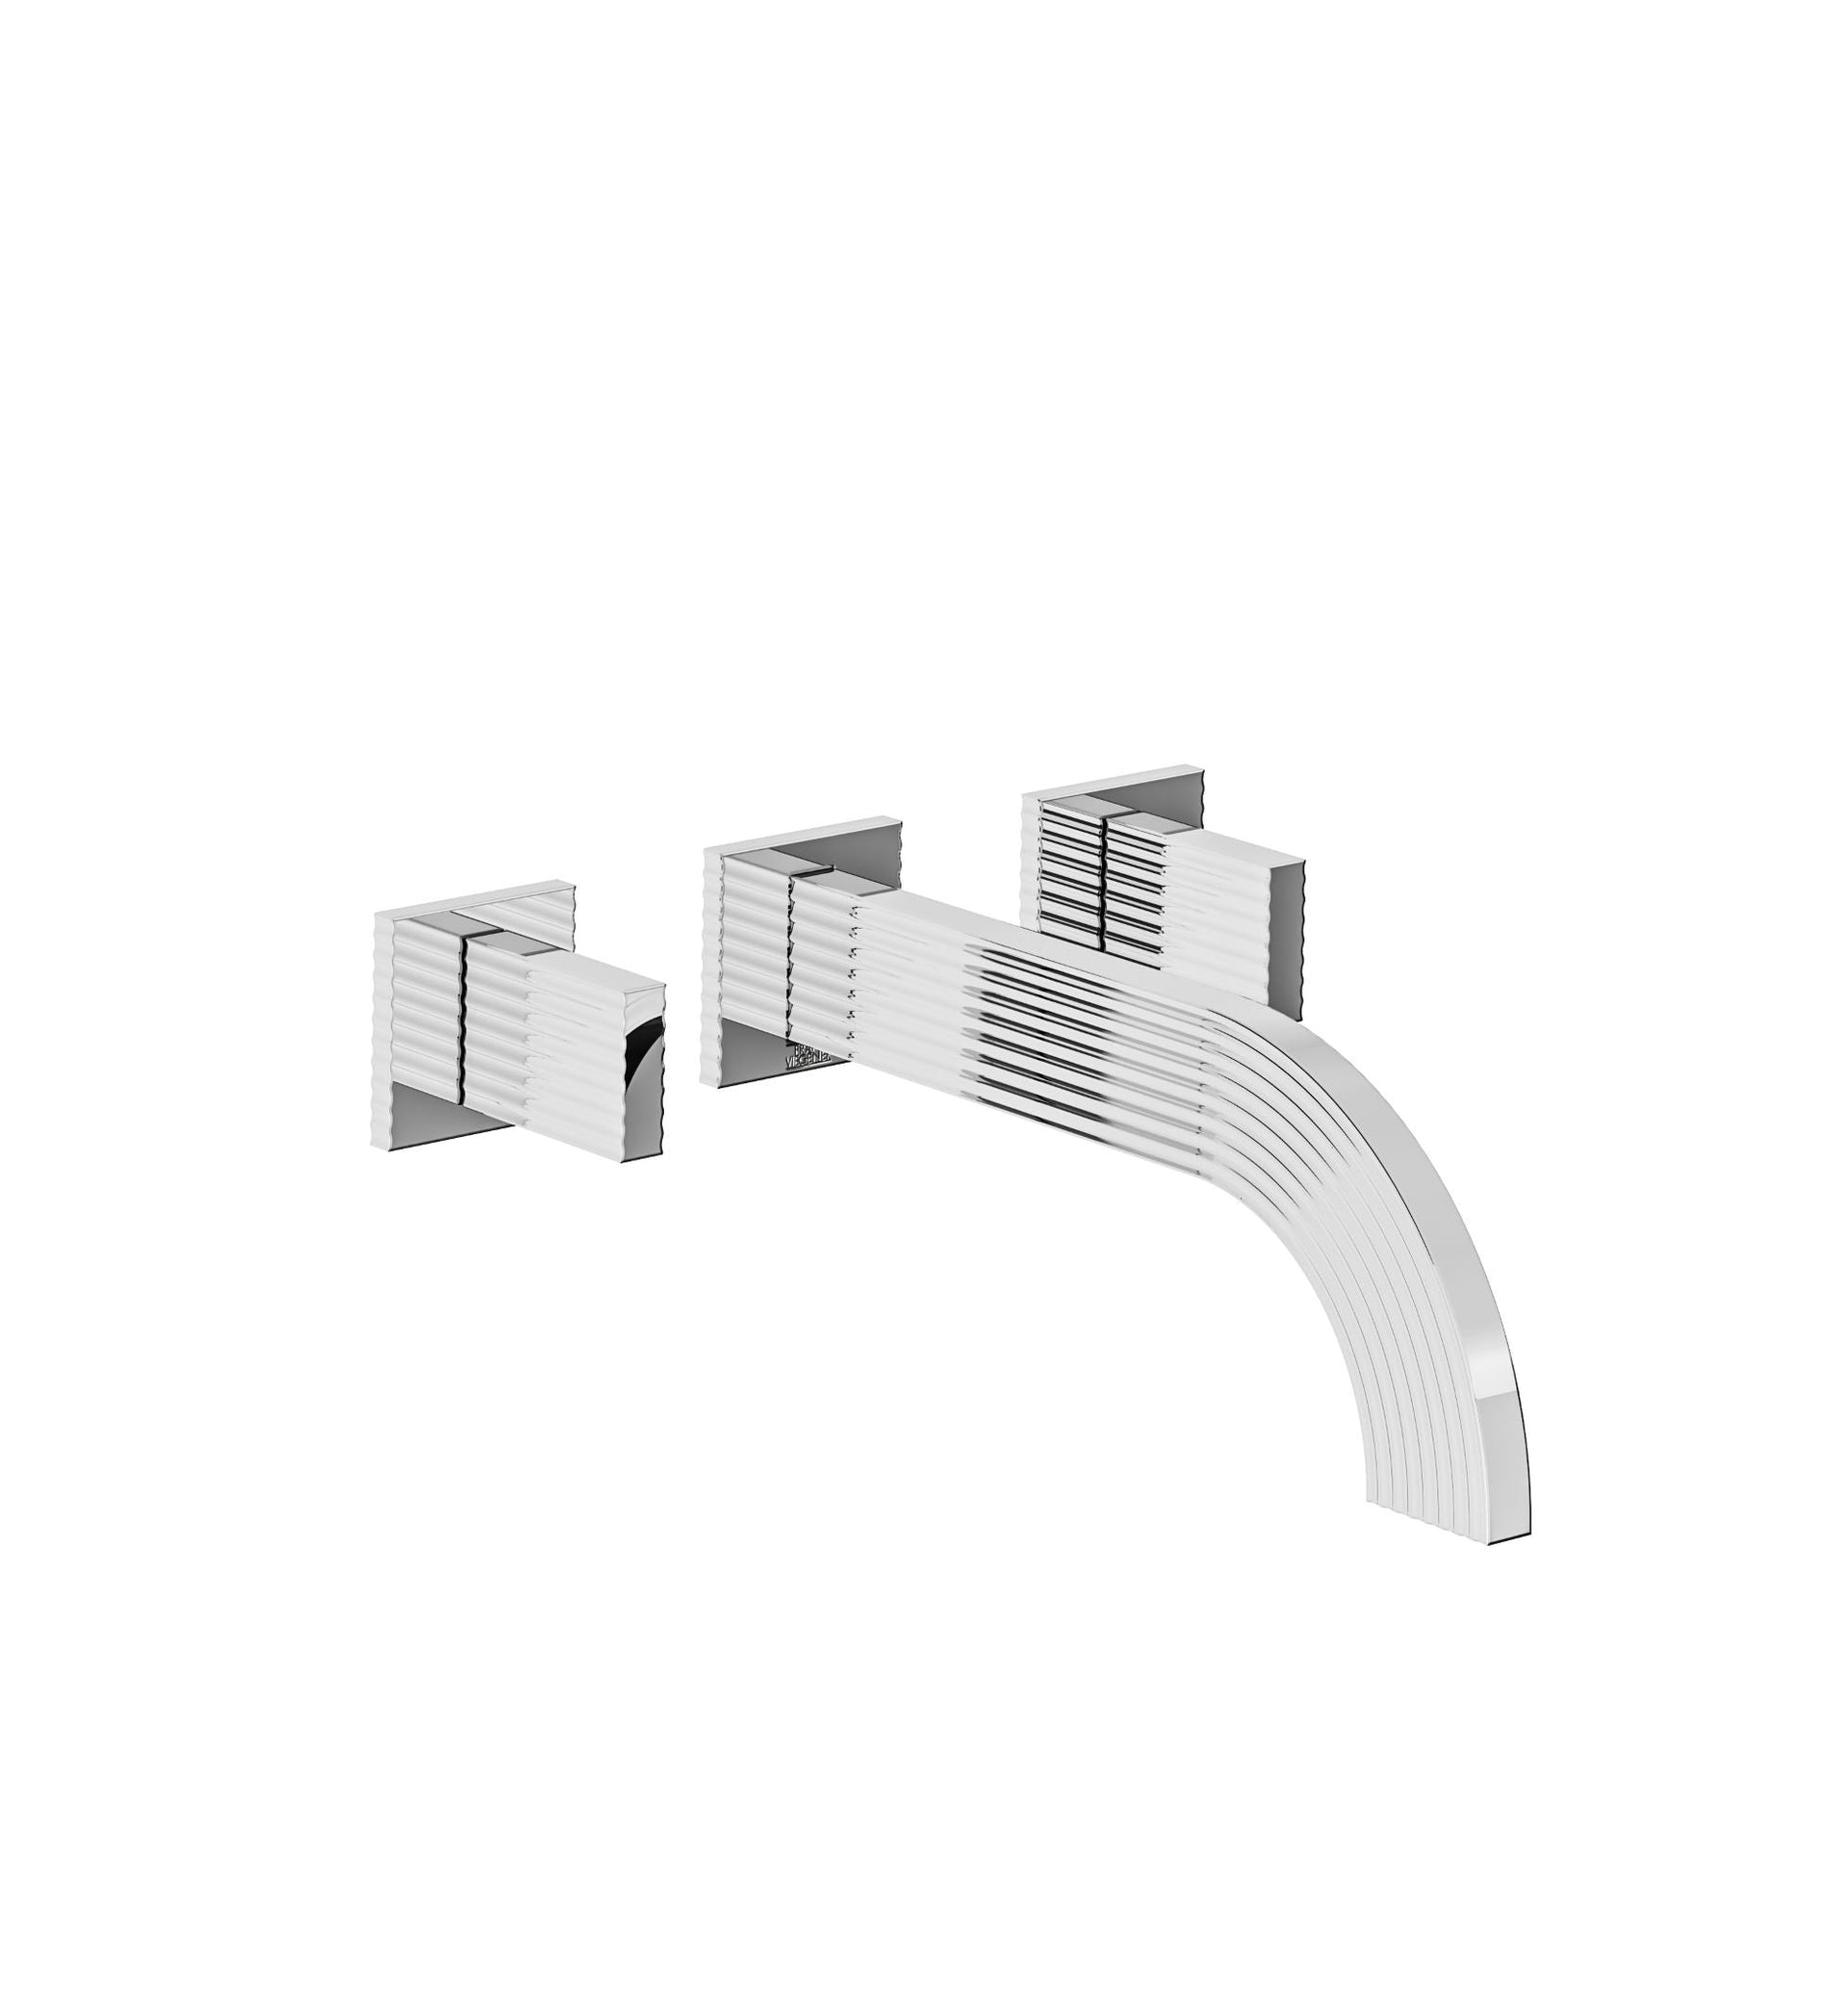 Groovy Wall-mounted lavatory faucet - Trim only